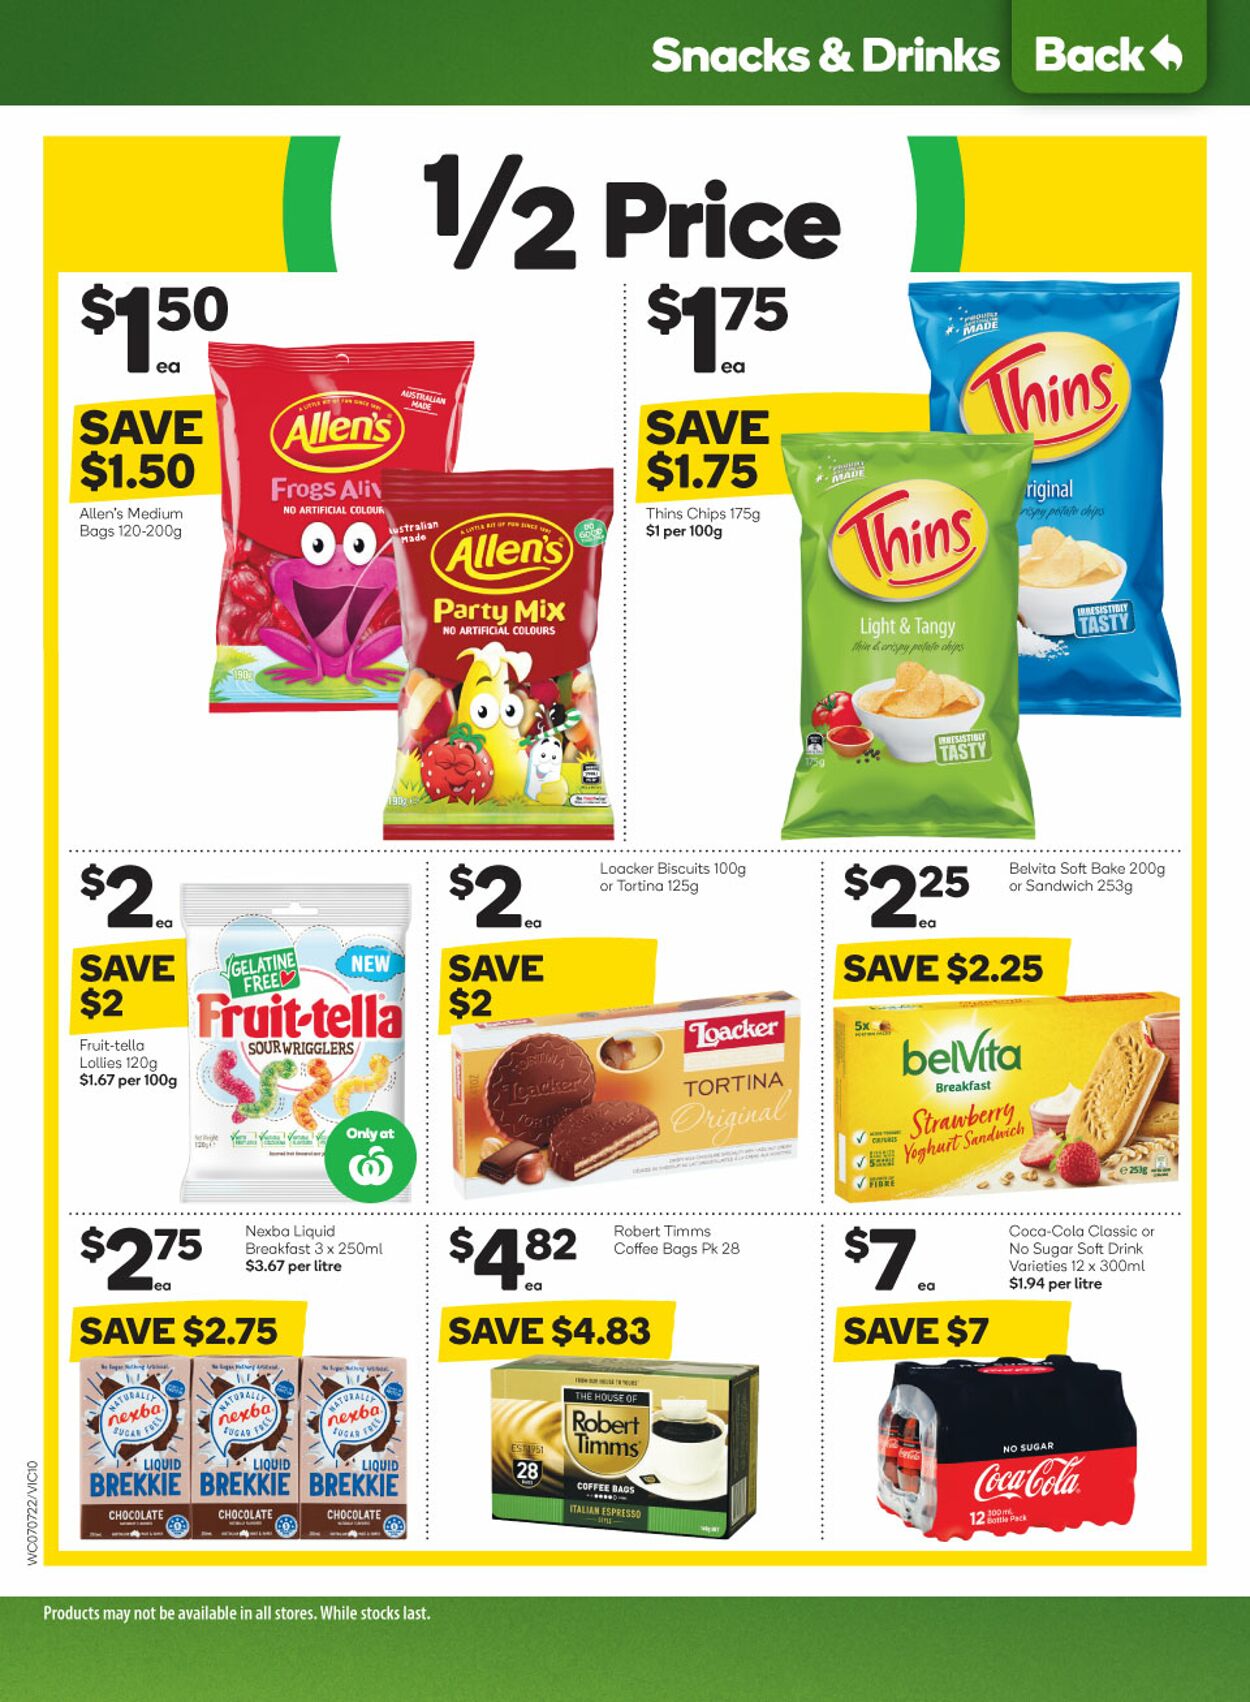 Catalogue Woolworths 21.07.2021 - 27.07.2021